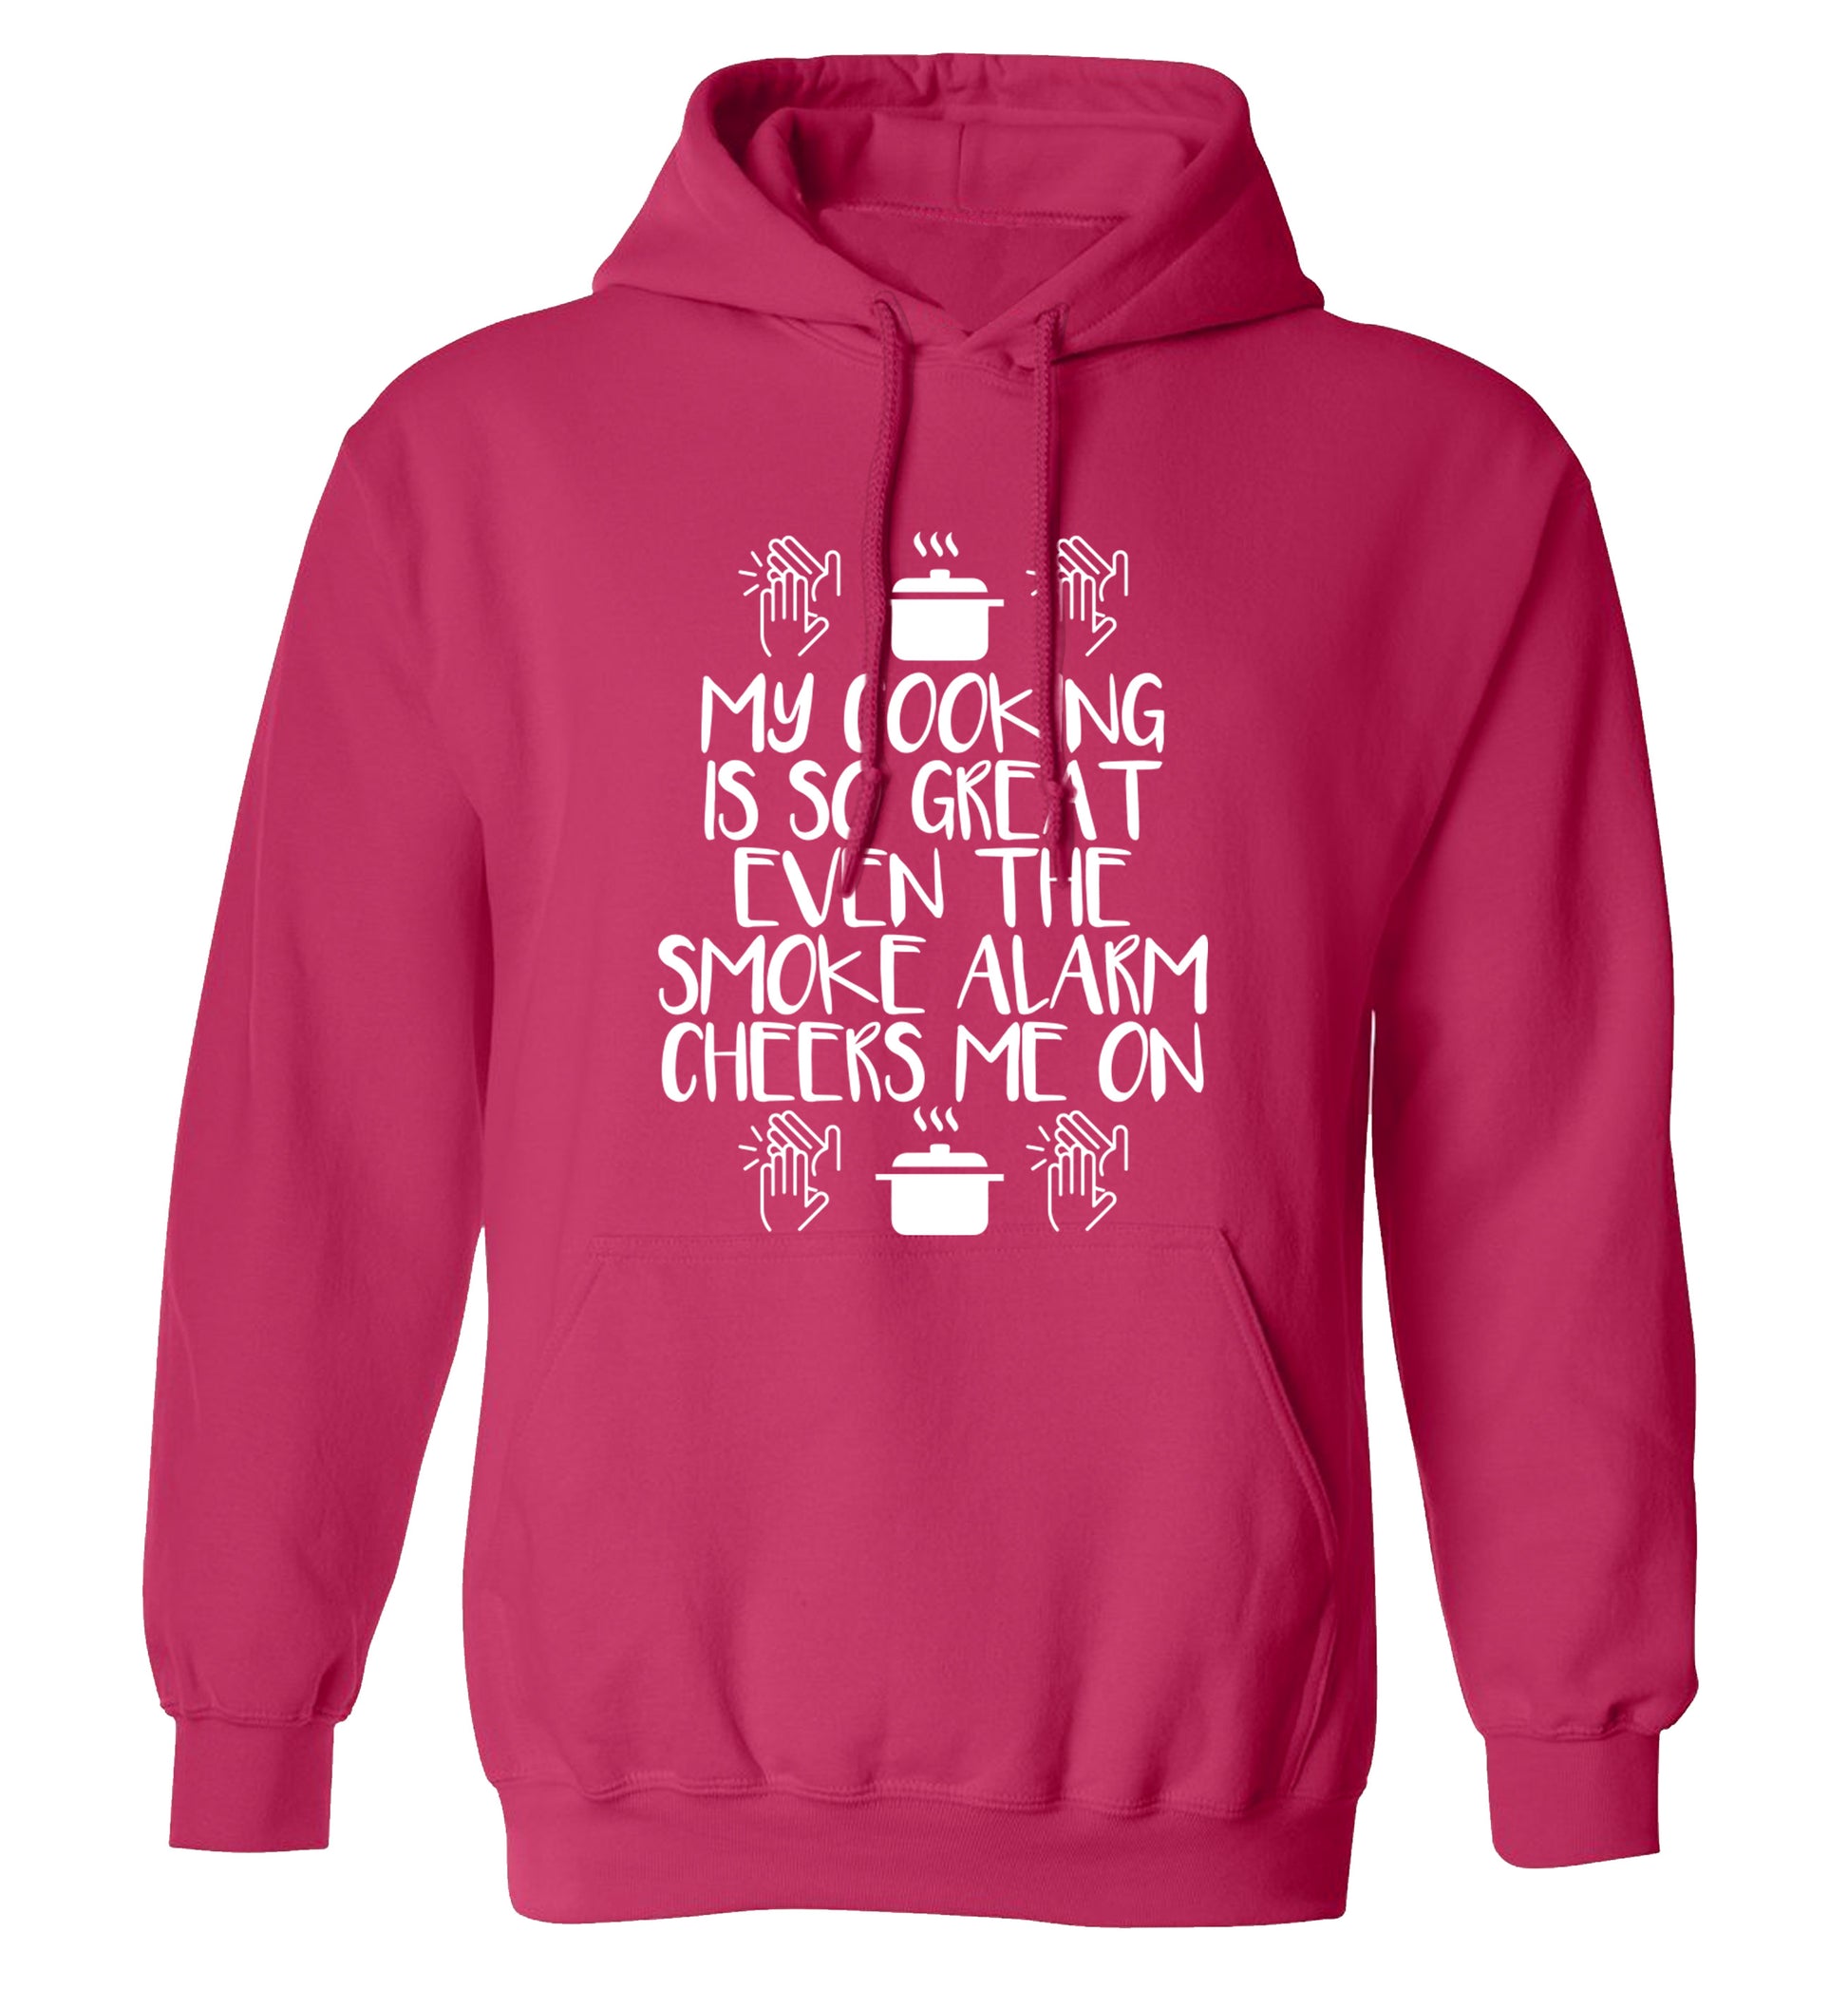 My cooking is so great even the smoke alarm cheers me on! adults unisex pink hoodie 2XL